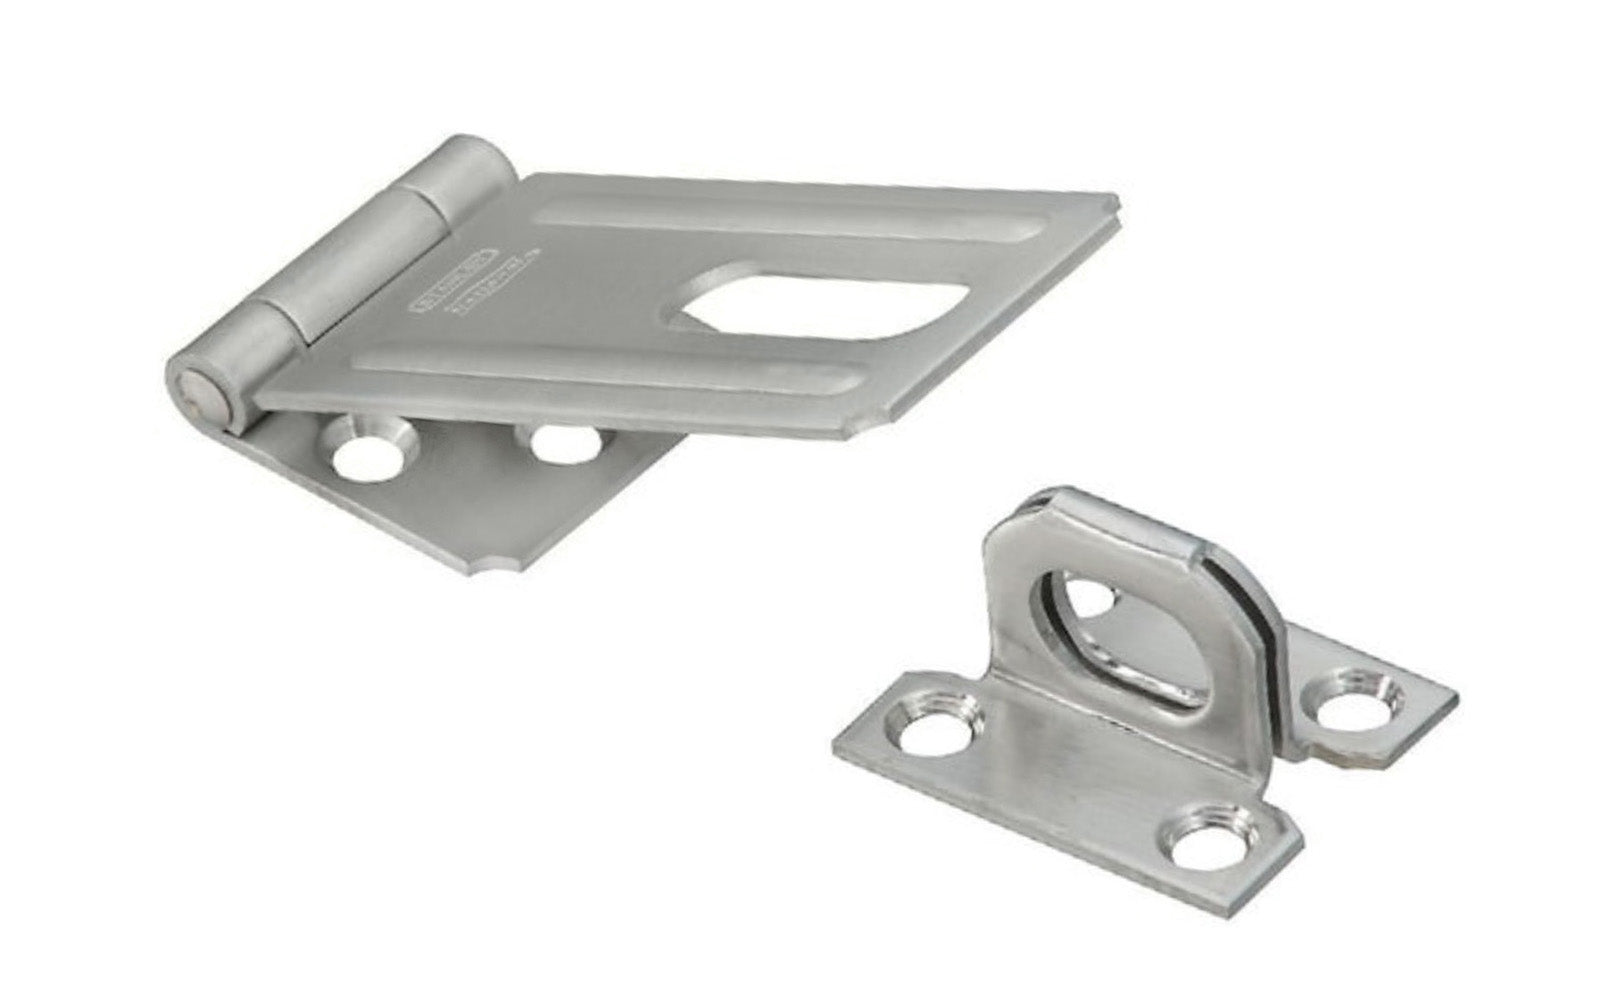 3-1/4" stainless steel safety hasp is designed to secure a variety of cabinets, small doors, trunks, & more. For security, all screws are concealed when hasp is closed. Includes rigid non-swivel staple. National Hardware Model N348-847. 038613348257. Stainless to withstand weather conditions & prevent corrosion.